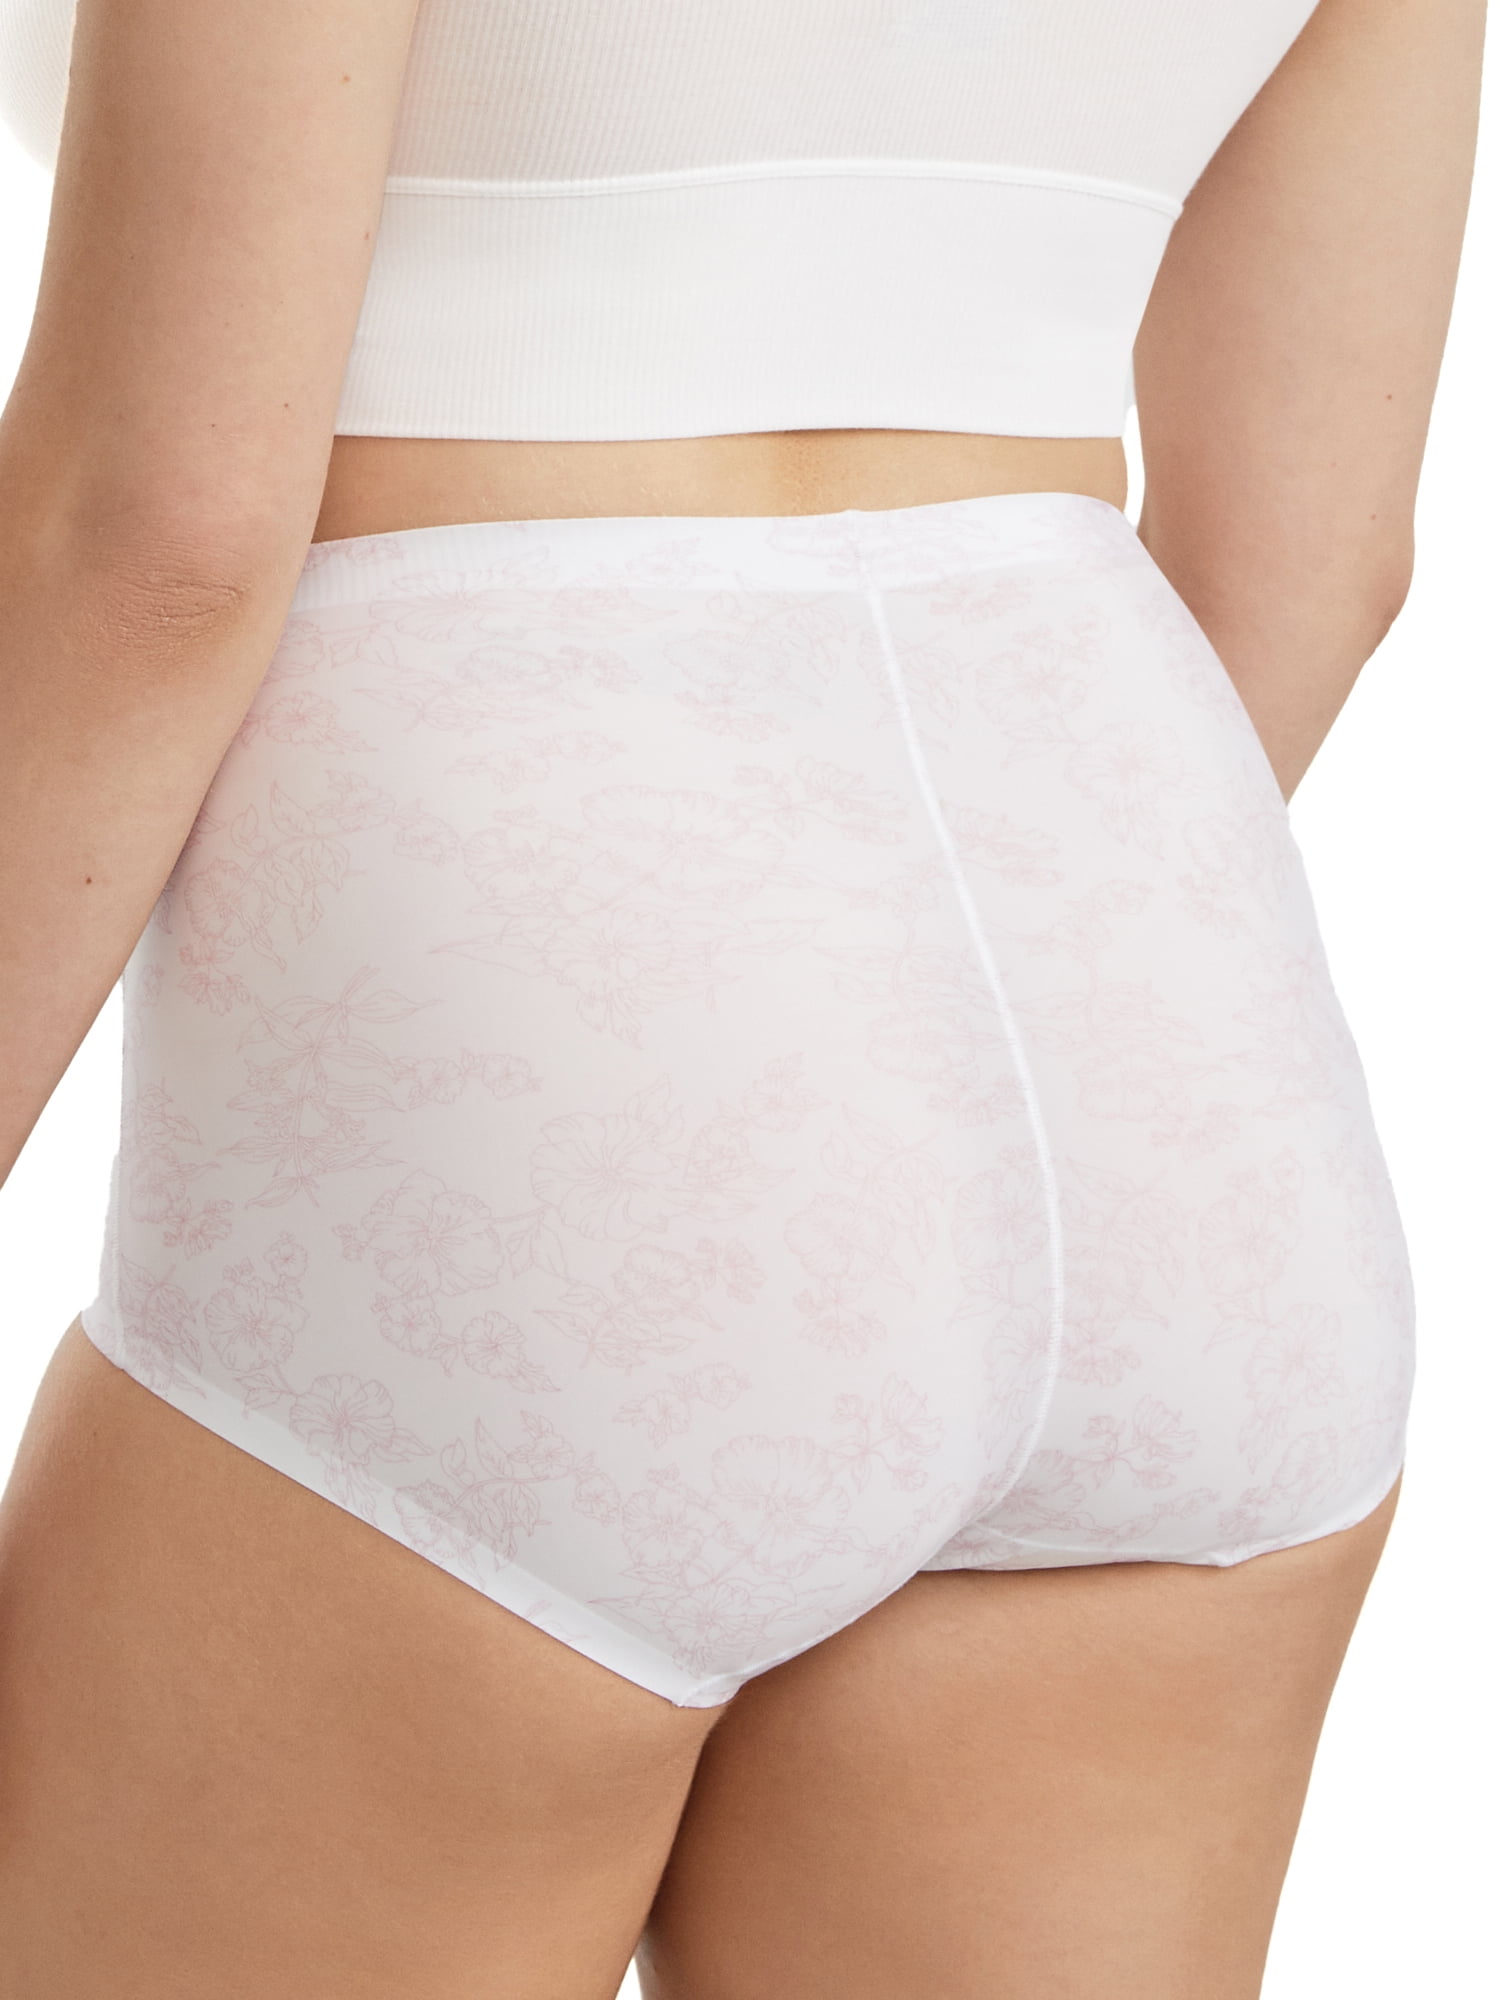 Bali Women's EasyLite​ Brief DFS059 2-Pack​, Misted Rose/in The